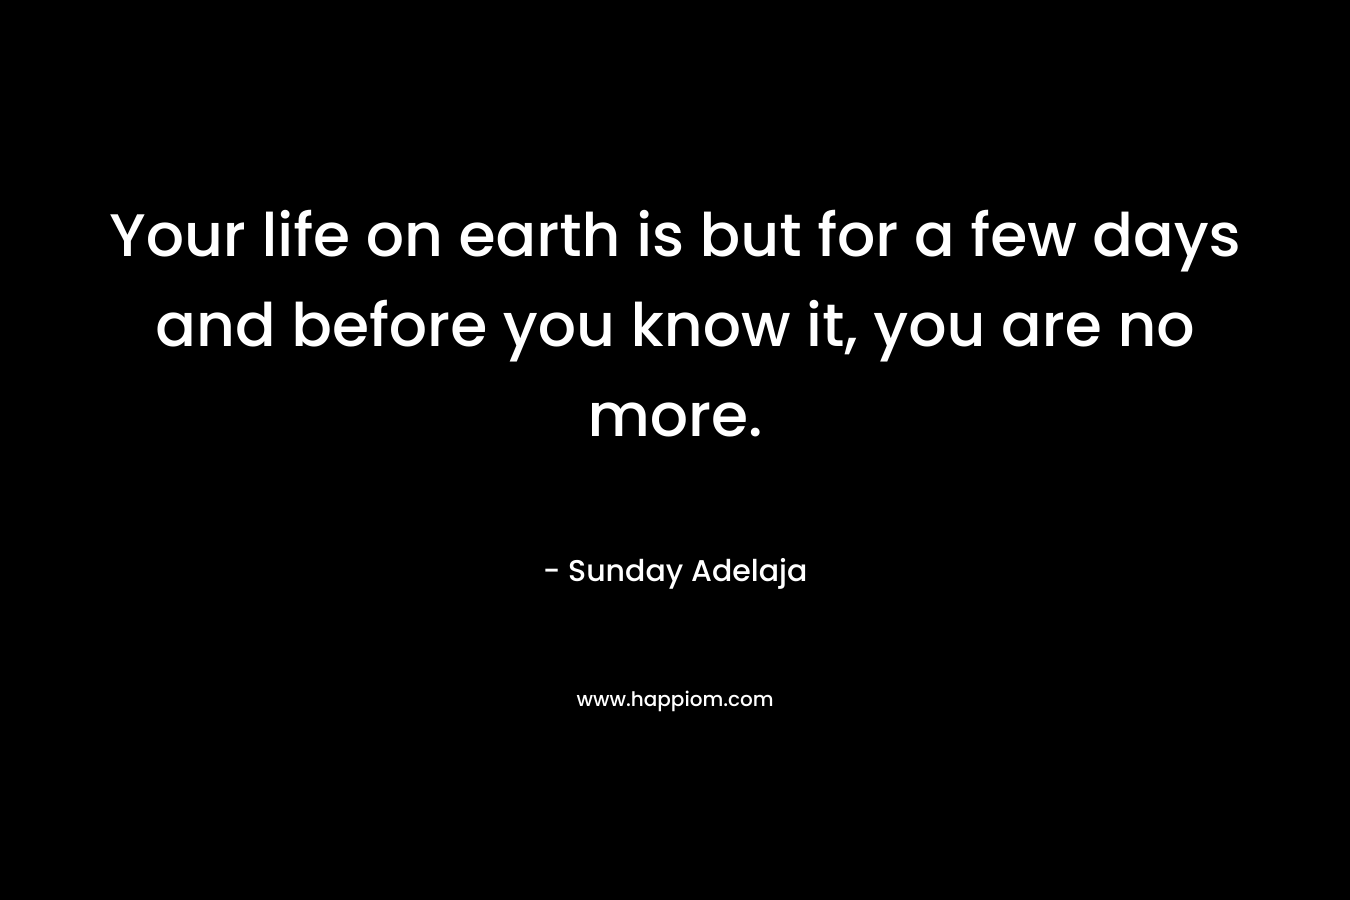 Your life on earth is but for a few days and before you know it, you are no more.